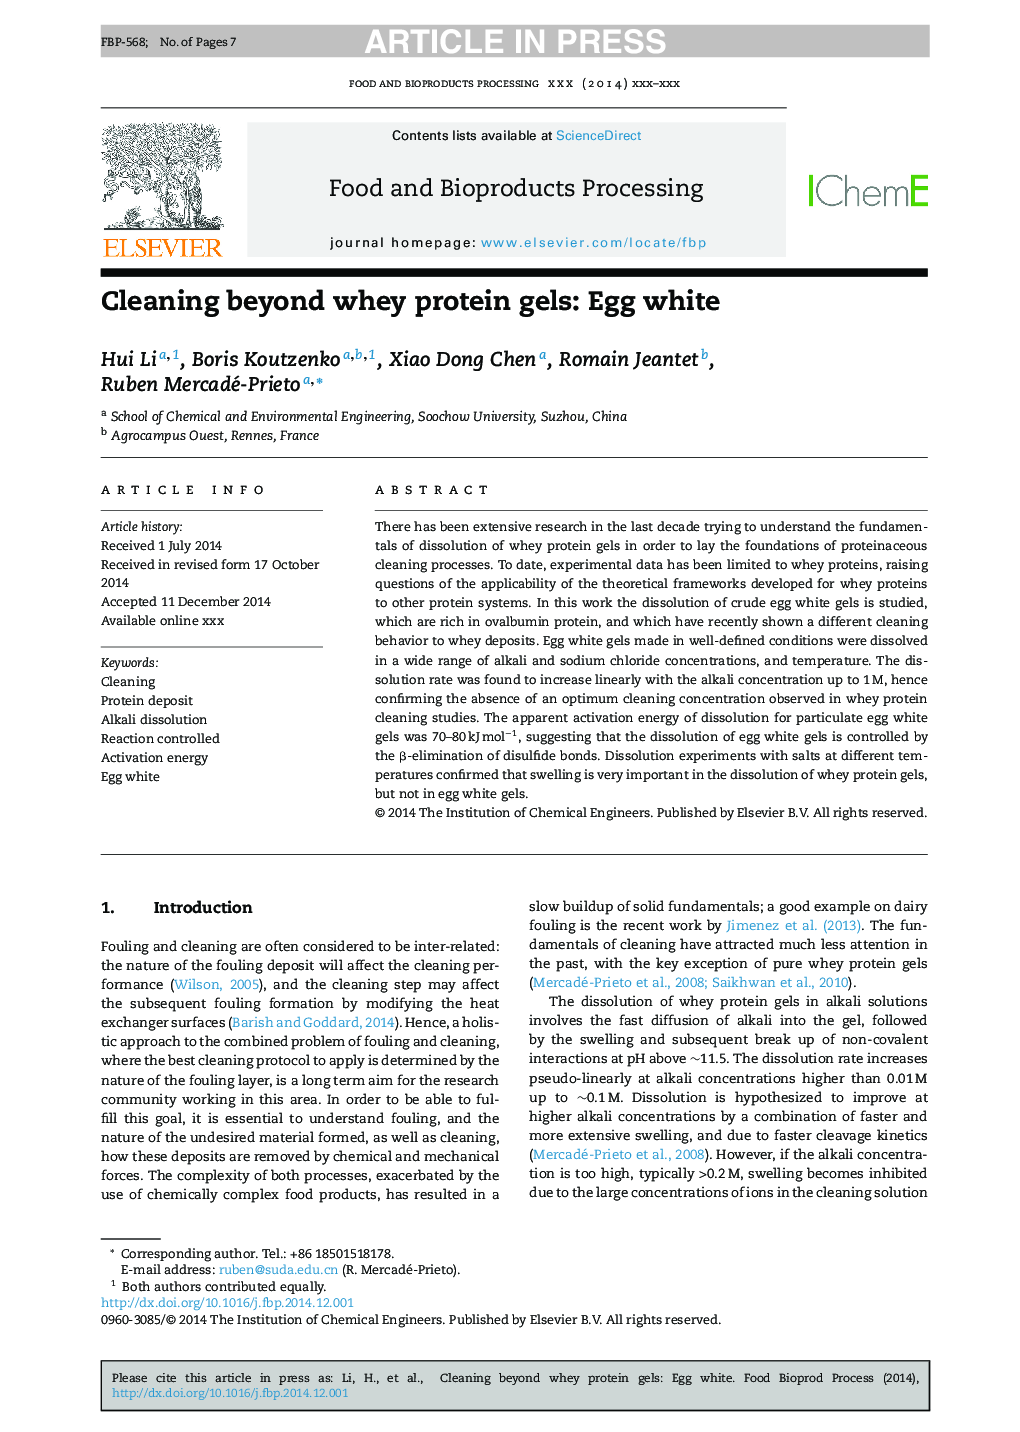 Cleaning beyond whey protein gels: Egg white